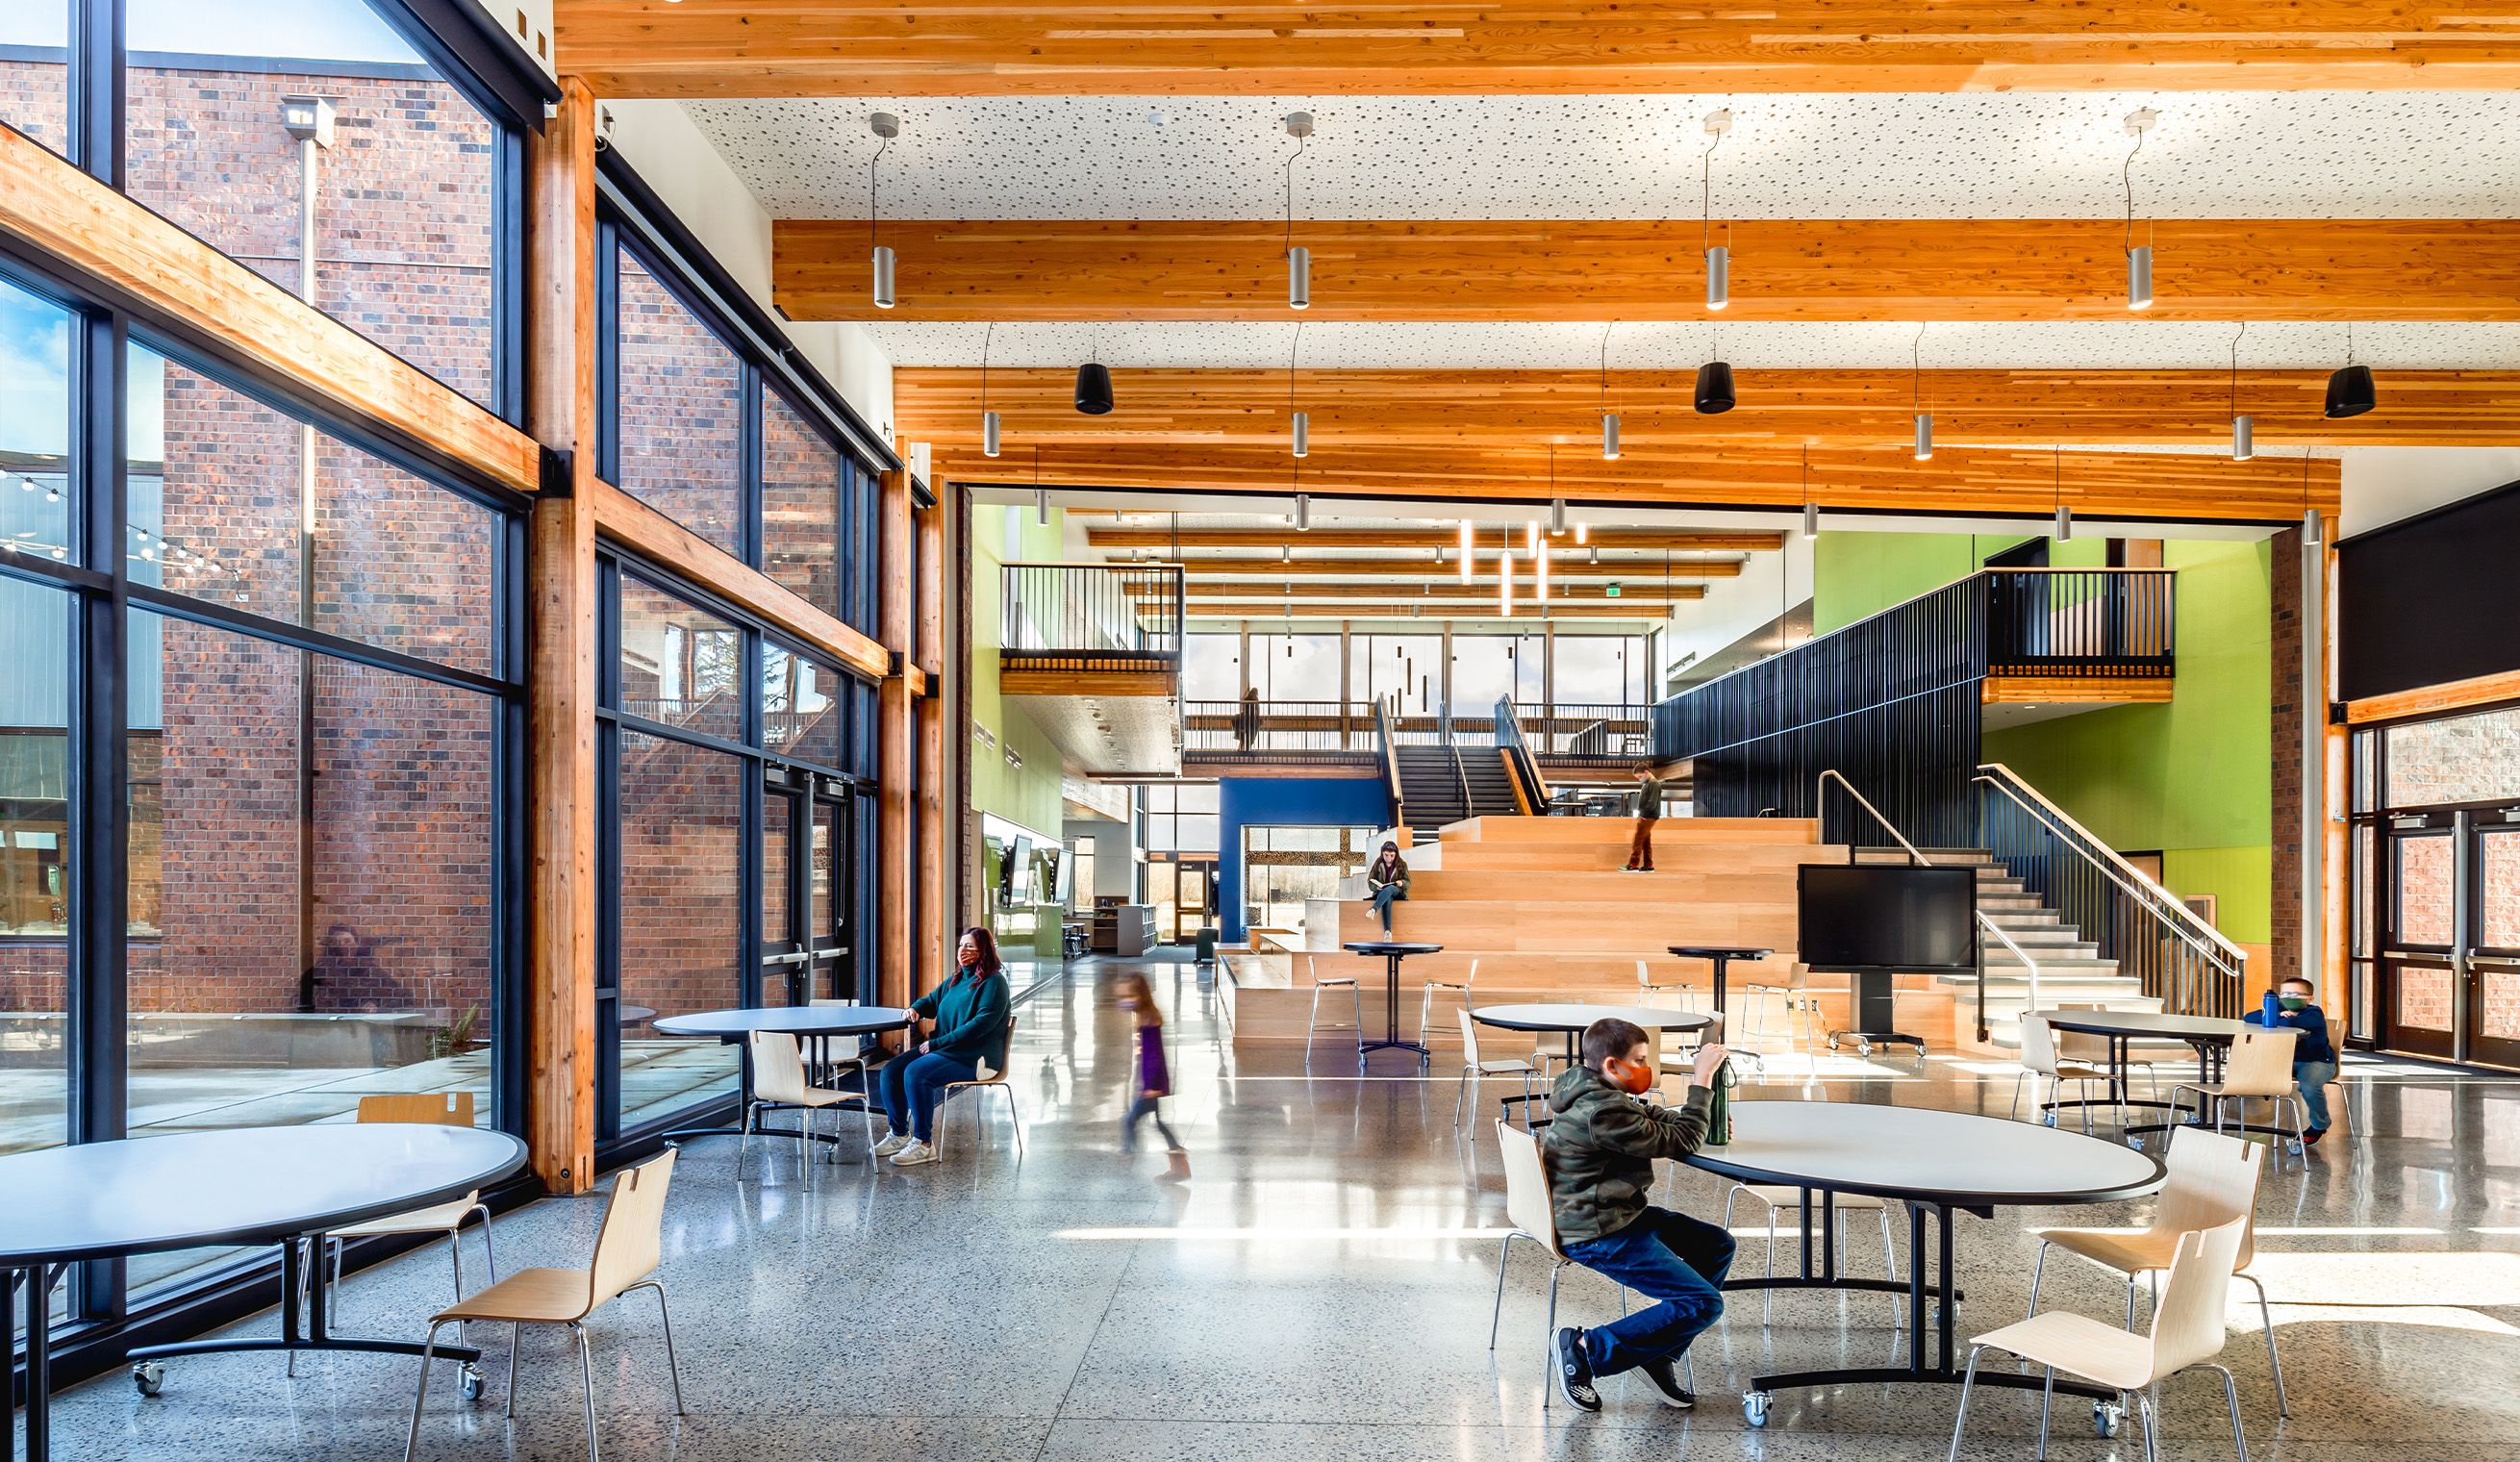 LSW Architects partnered with Evergreen Public Schools to develop a cost-effective prototype model for seven of its elementary schools in Vancouver, Washington.